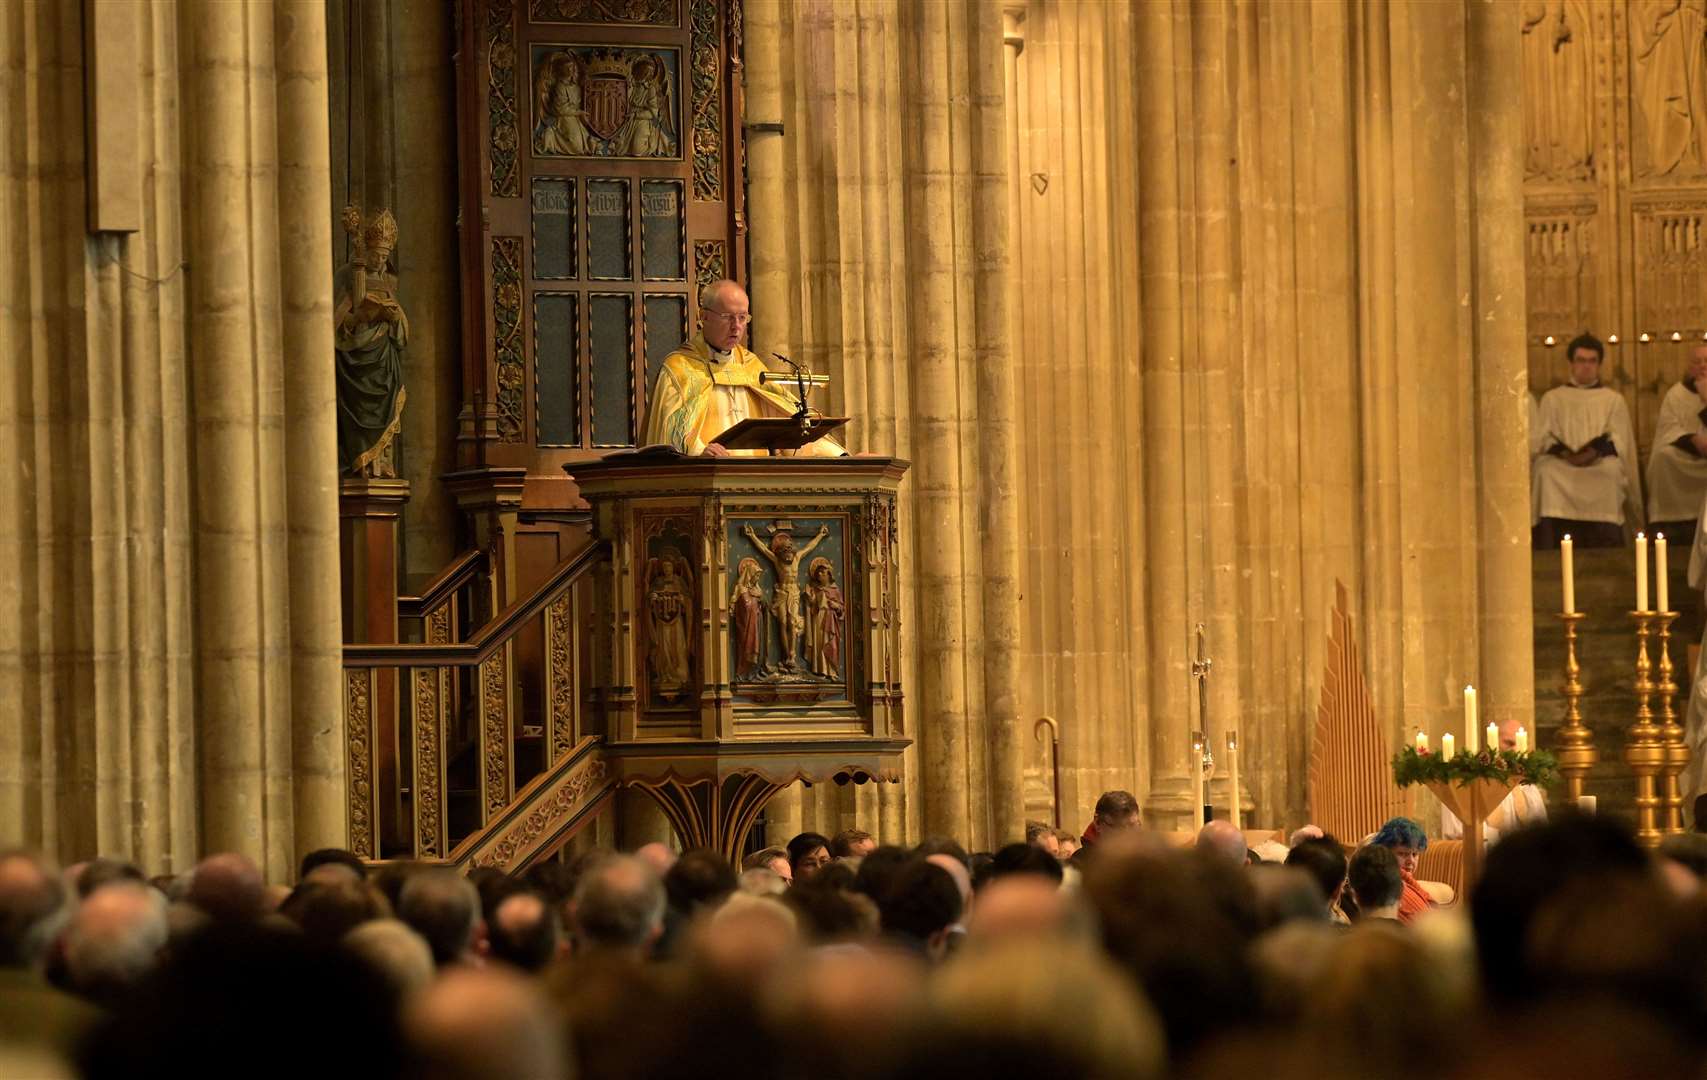 The Christmas Day morning Eucharist service was held at Canterbury Cathedral. Picture: Stuart Brock